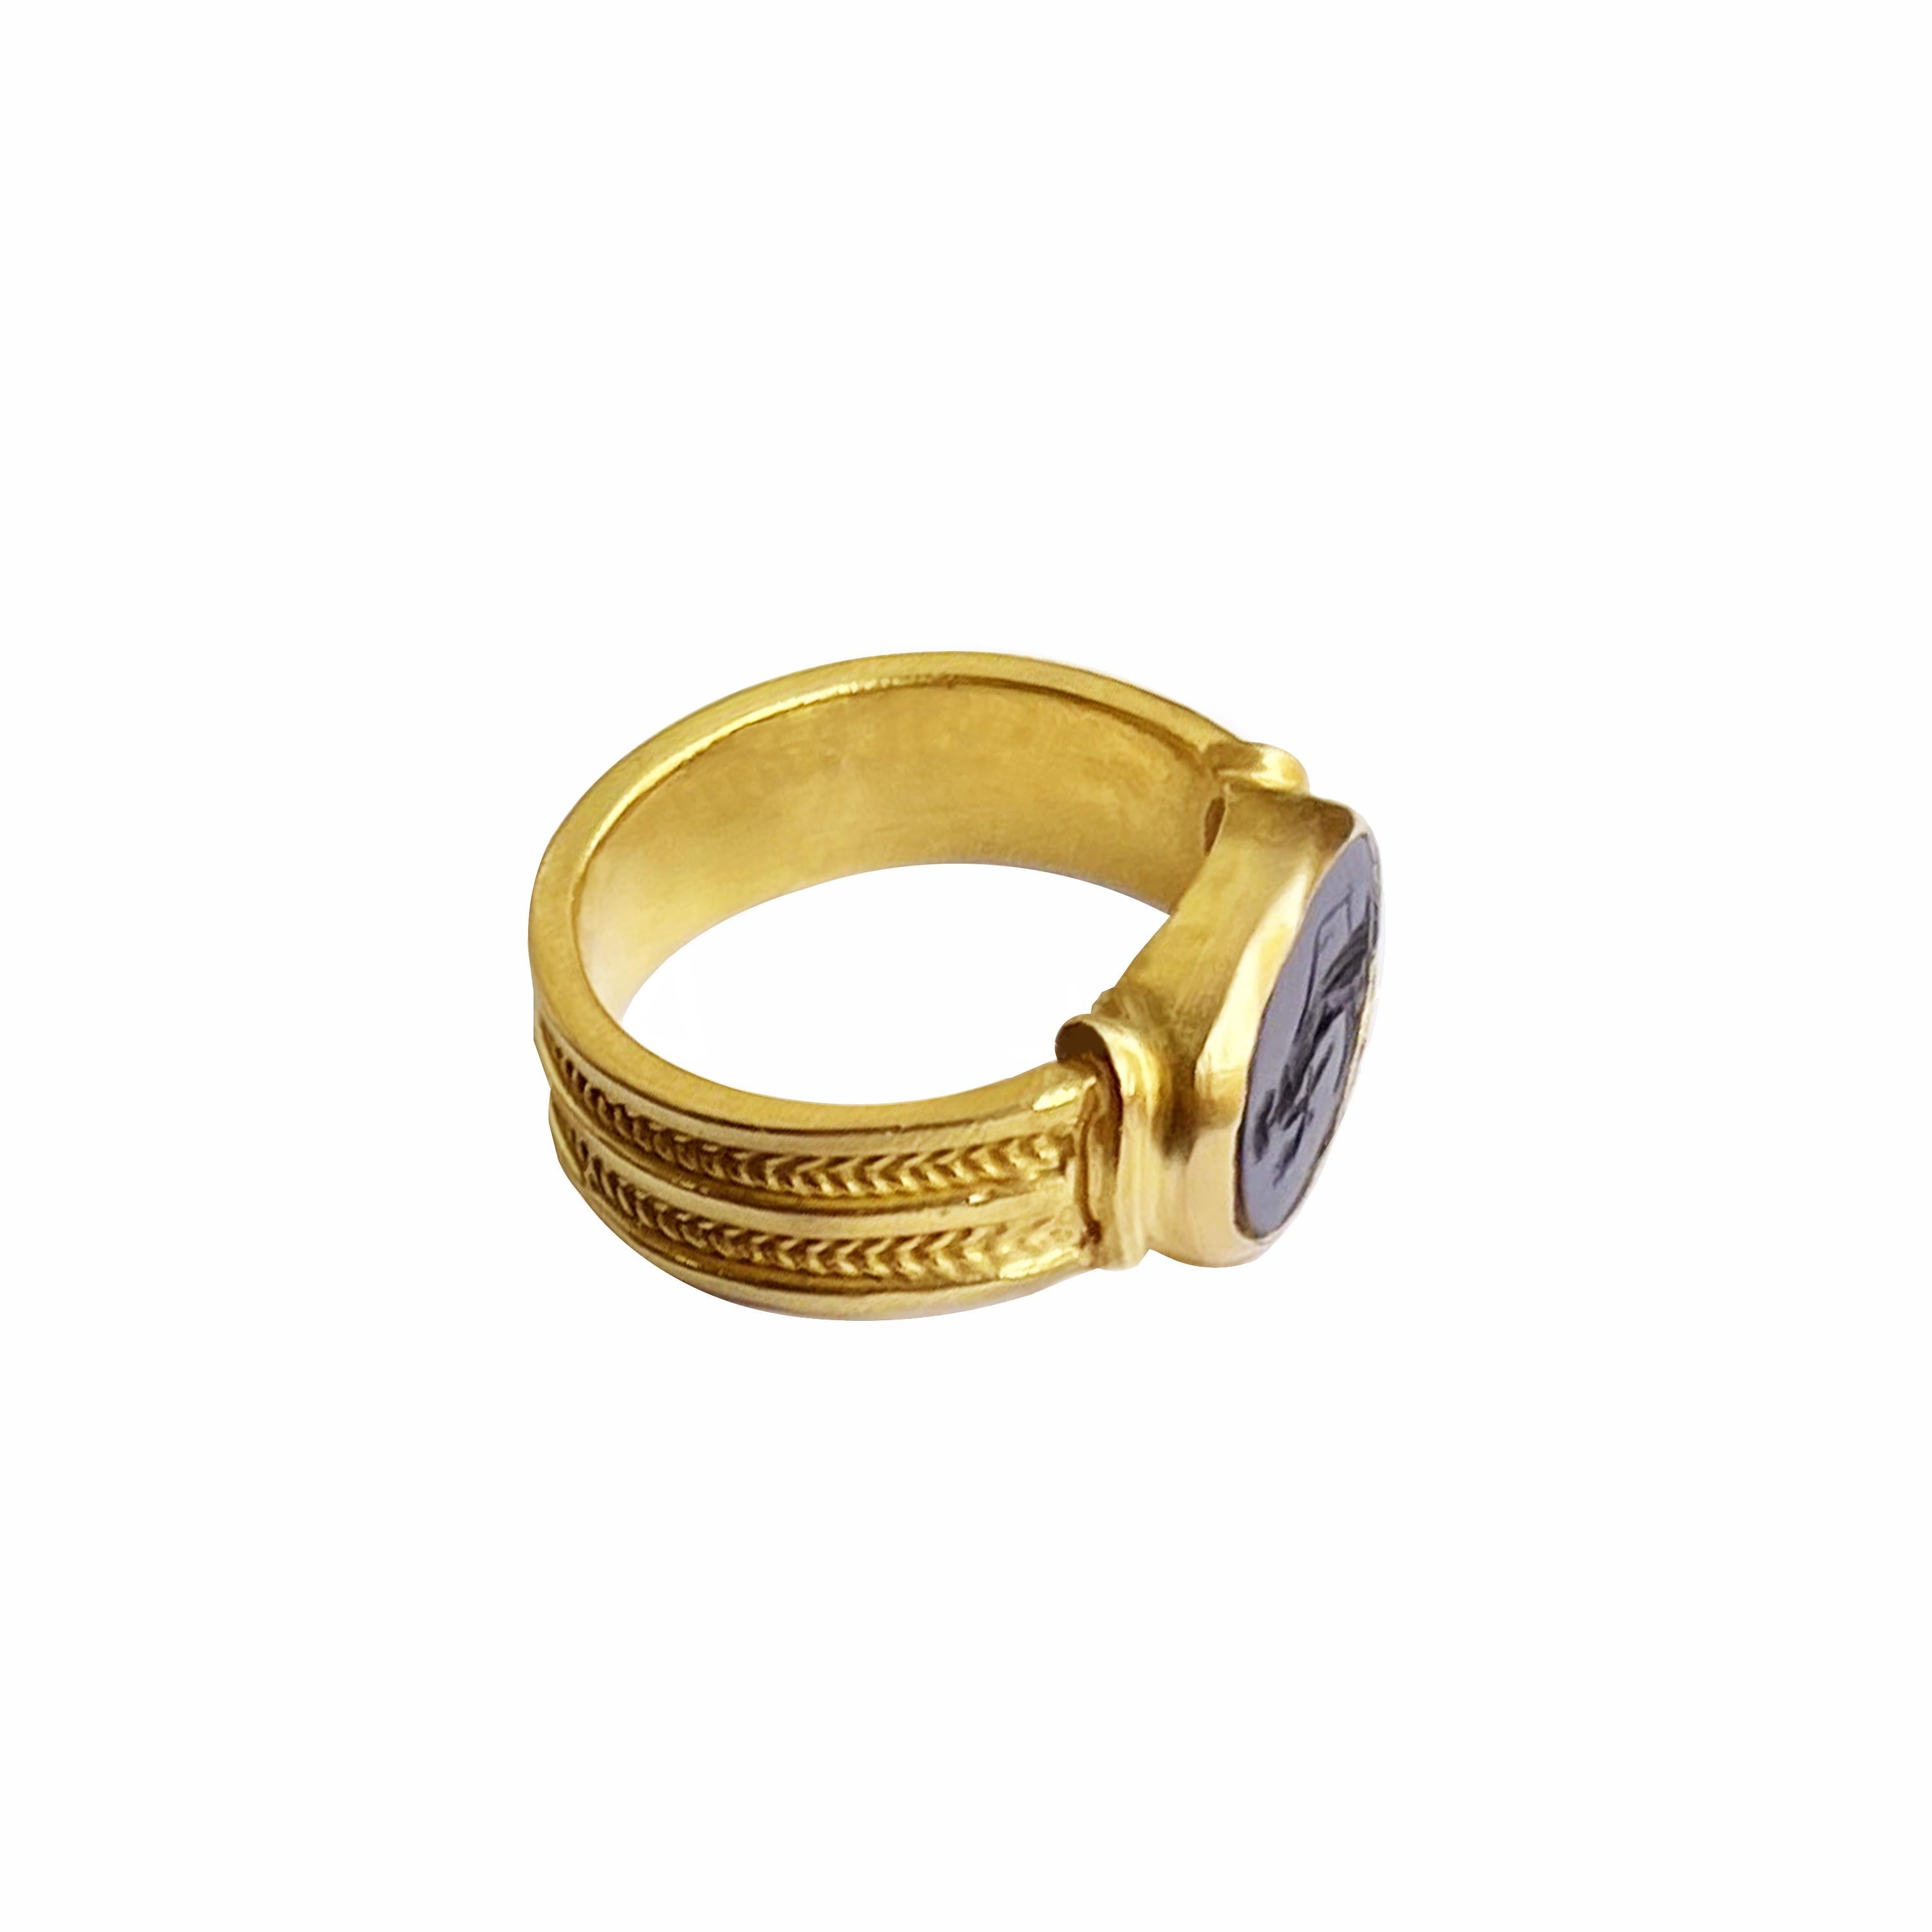 In this 18 Kt gold ring entirely handmade by our goldsmiths an authentic Roman intaglio (1st century AD) is set, depicting the goddess Fortuna with her classic attributes: rudder and Cornucopia.
Fortuna (Latin: Fortūna, equivalent to the Greek